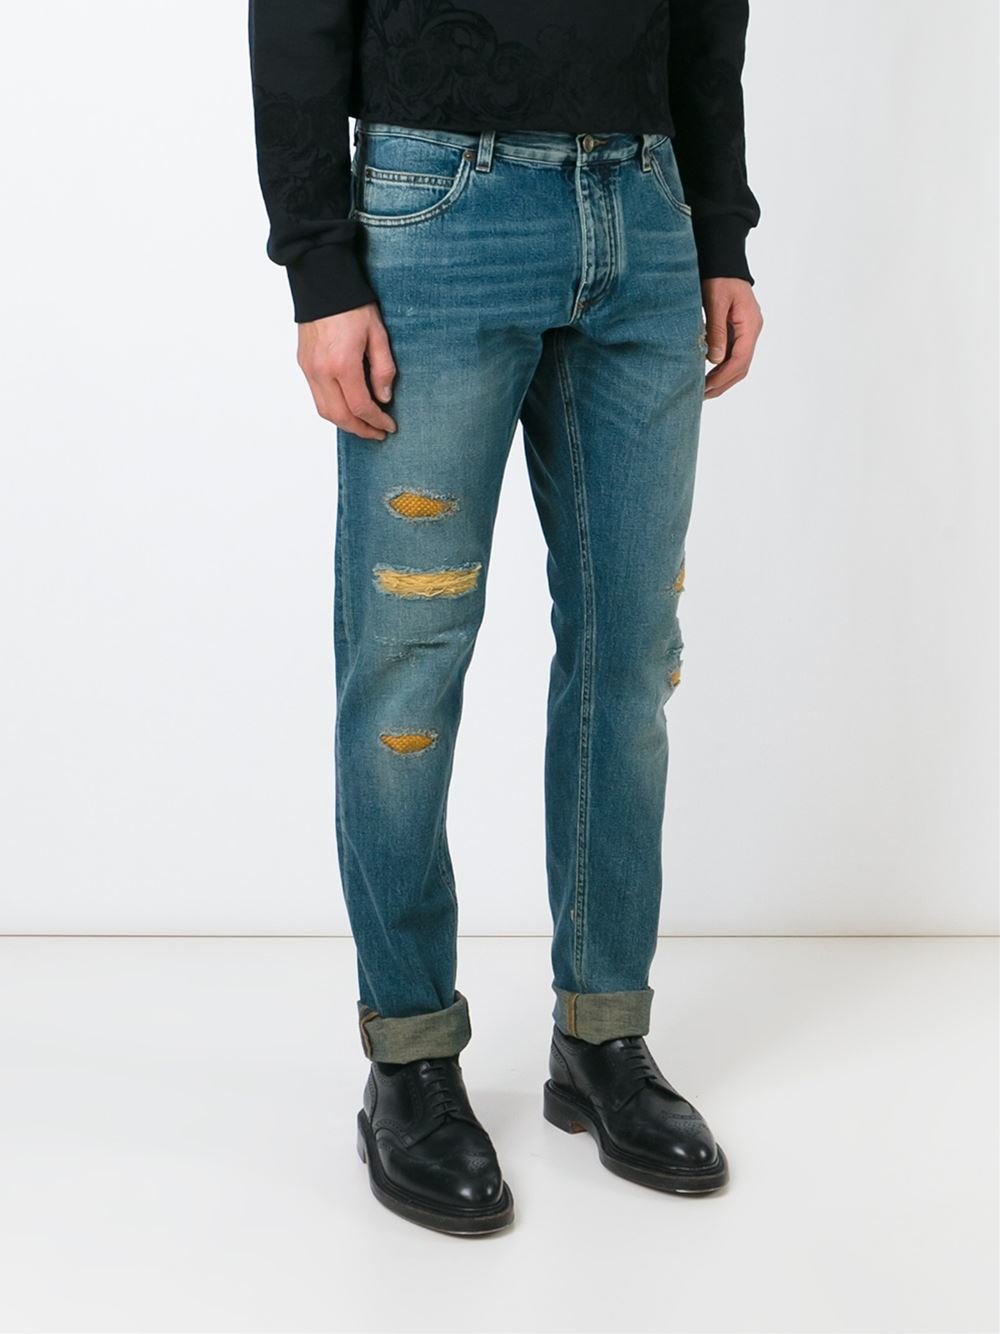 Dolce & Gabbana Denim Ripped Tapered Jeans in Blue for Men - Lyst